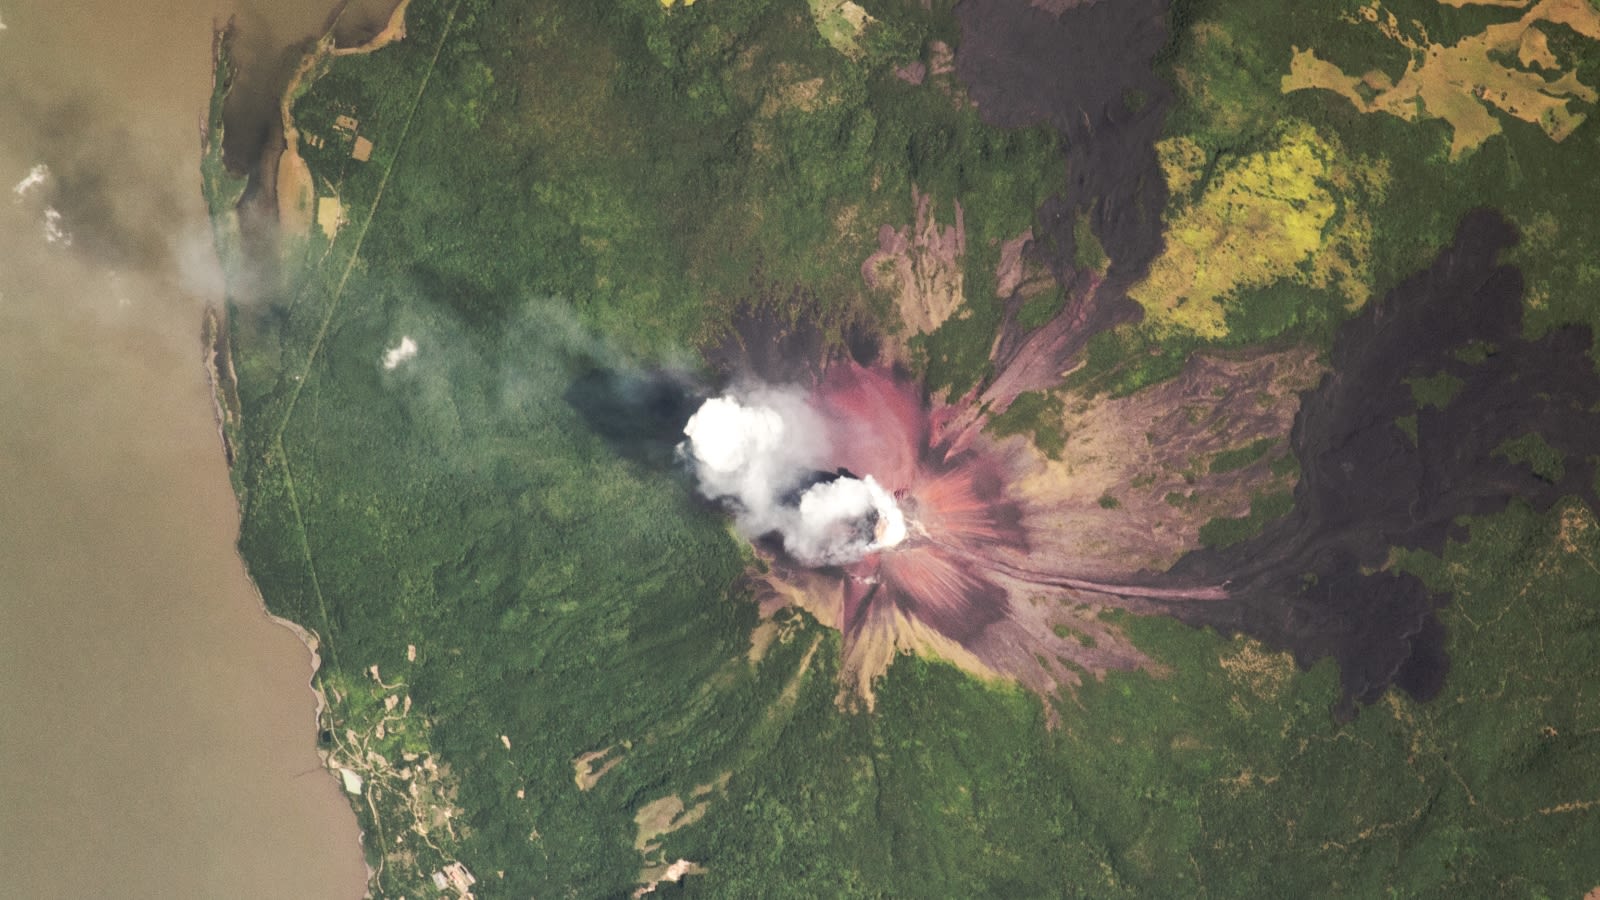 Earth from space: 'Smoking terror' volcano that destroyed city 400 years ago burps toxic cloud